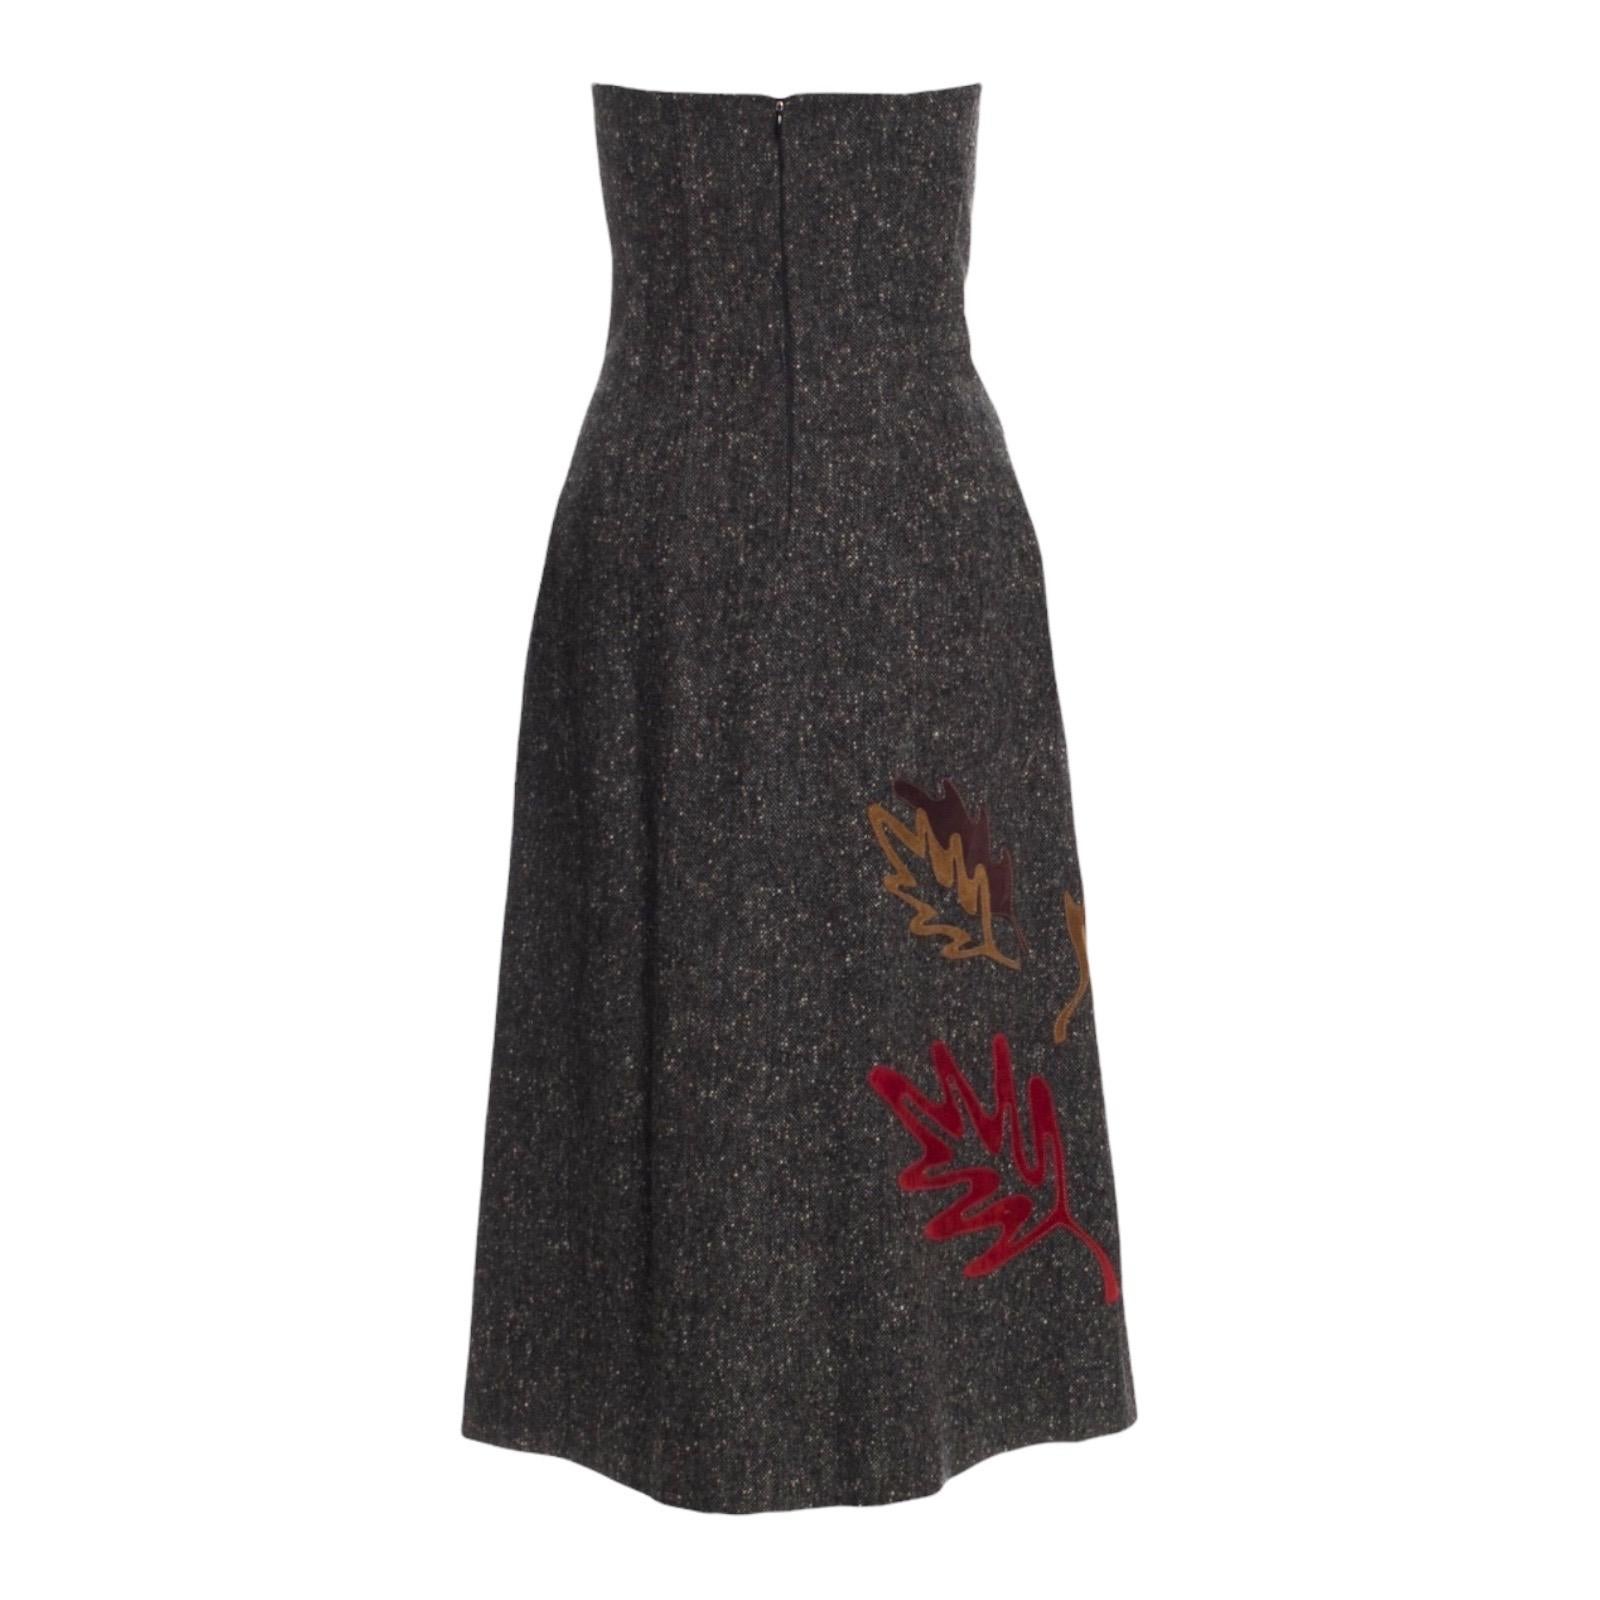 Timeless tweed dress by Dolce & Gabbana
Adjustable lace up detail in front
Corset inside fully boned
Closes with concealed zip
Two side pockets, still stitched up and unopened
Suede leather trimmings
Made in Italy
Dry Clean Only
Size 44, fits best